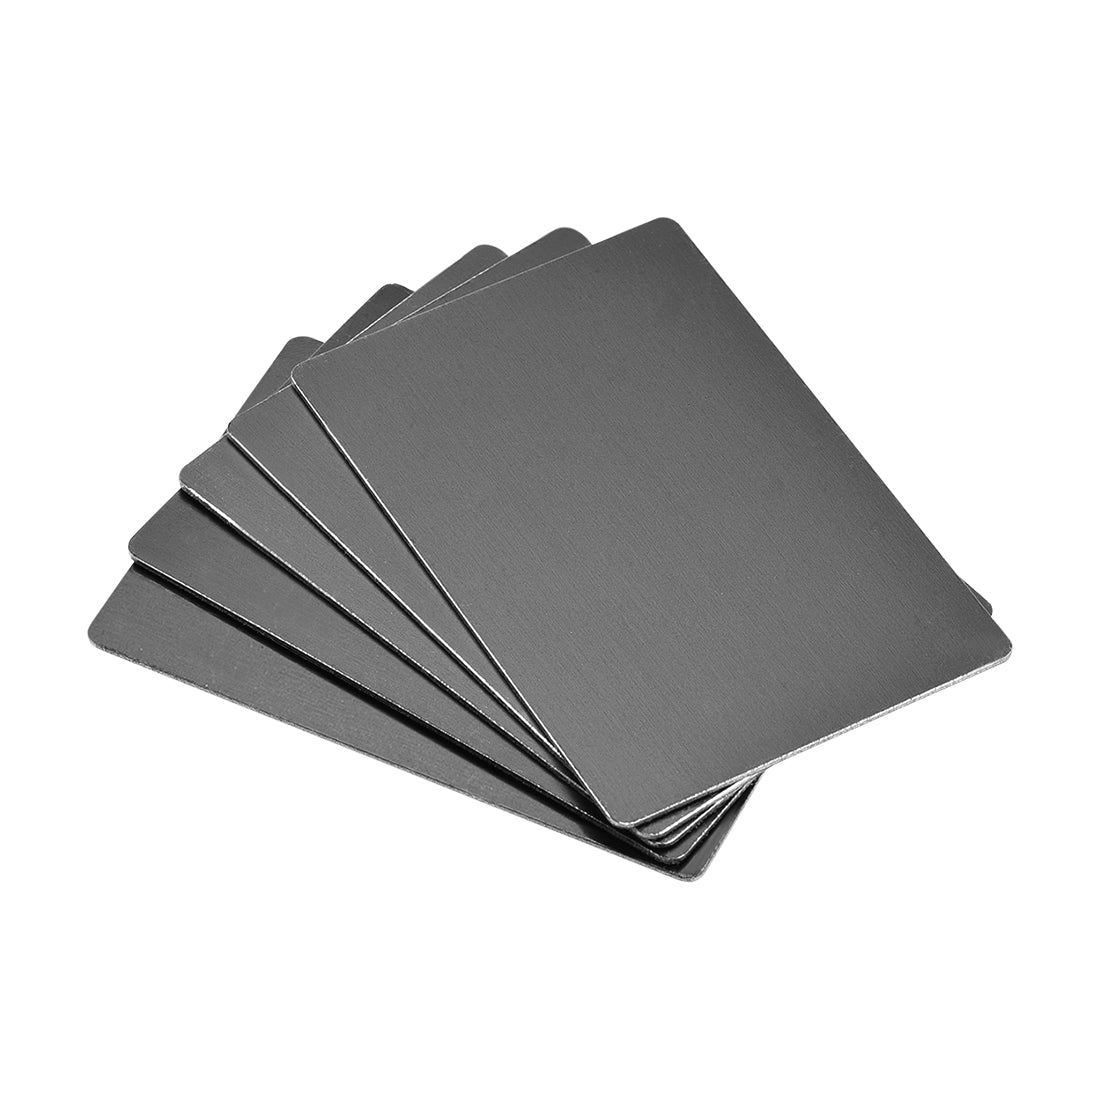 Uxcell Uxcell Blank Metal Business Card 100x60x0.8mm Anodized Aluminum Plate for DIY Laser Printing Black 5 Pcs